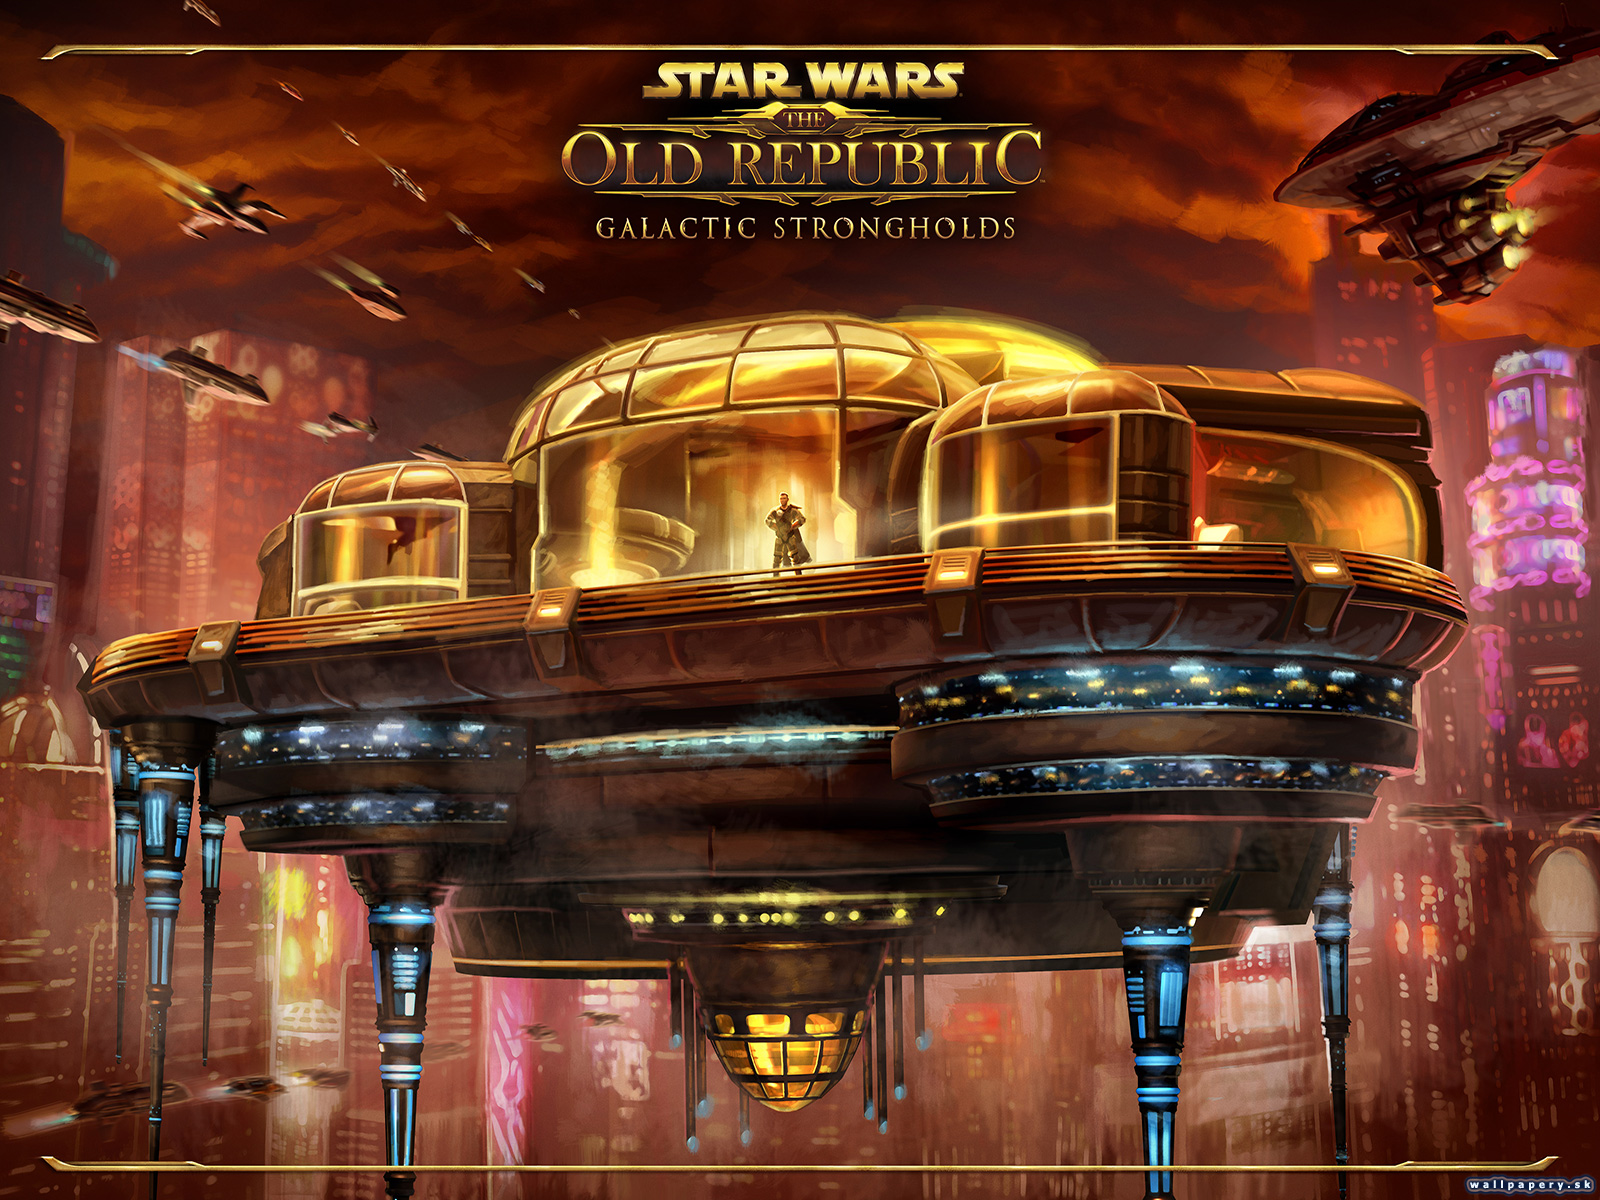 Star Wars: The Old Republic - Galactic Strongholds - wallpaper 1